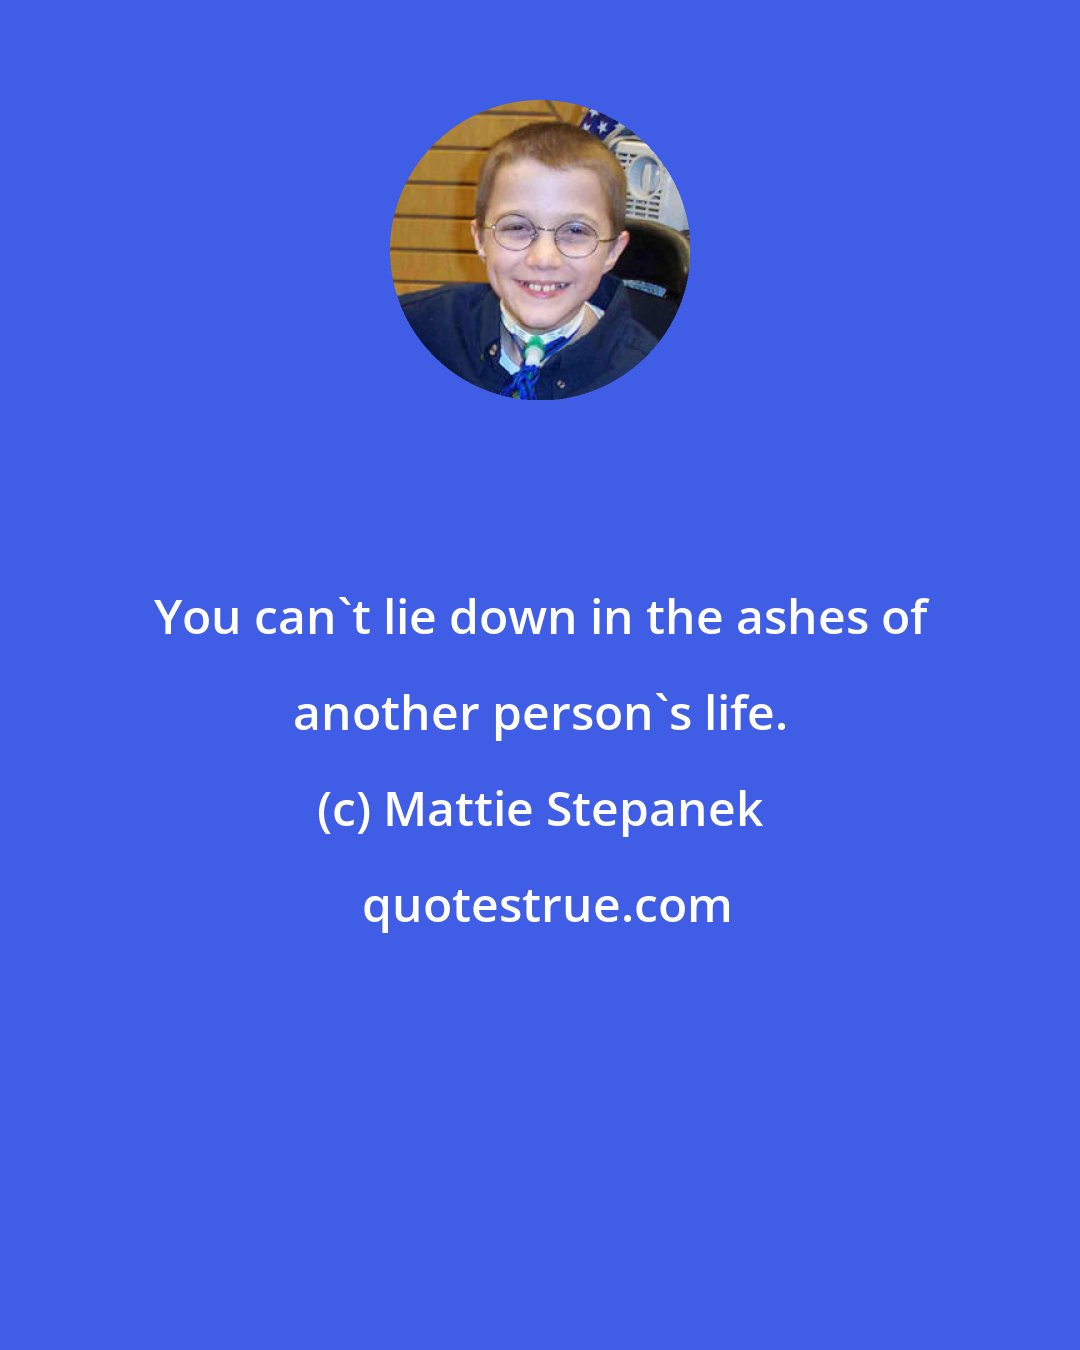 Mattie Stepanek: You can't lie down in the ashes of another person's life.